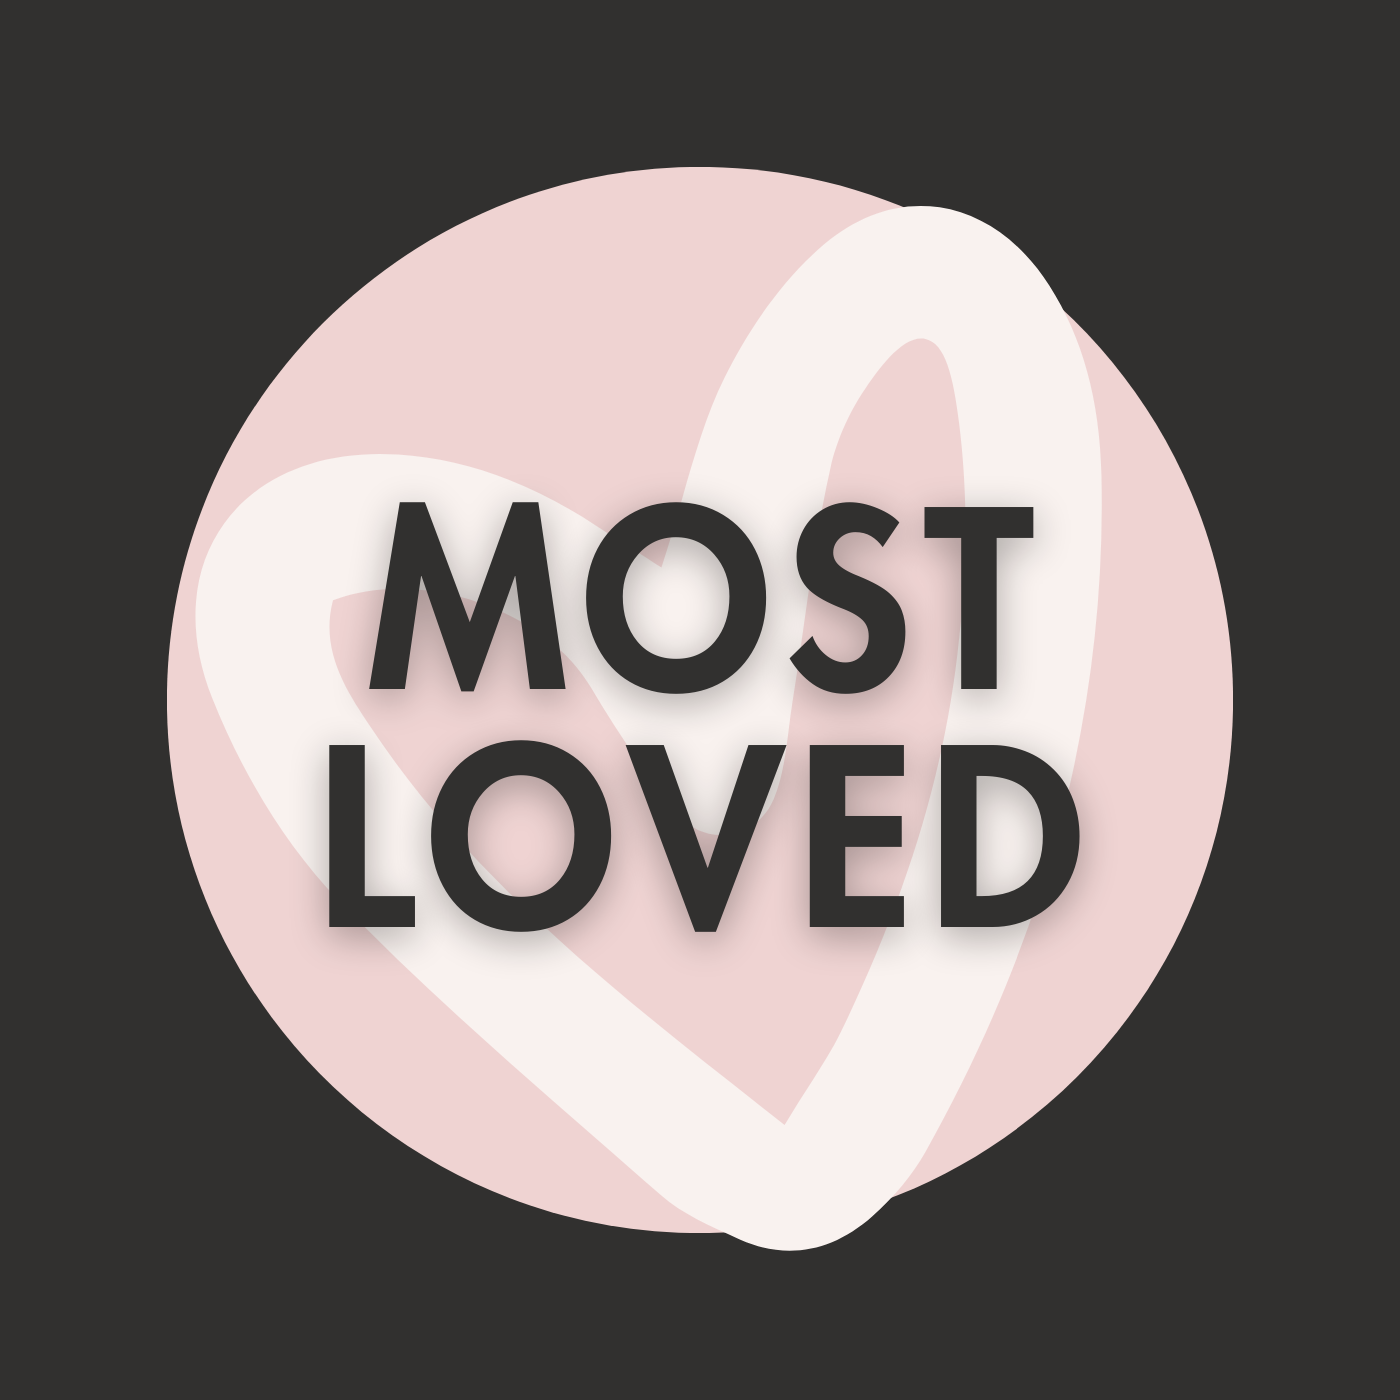 MOST LOVED